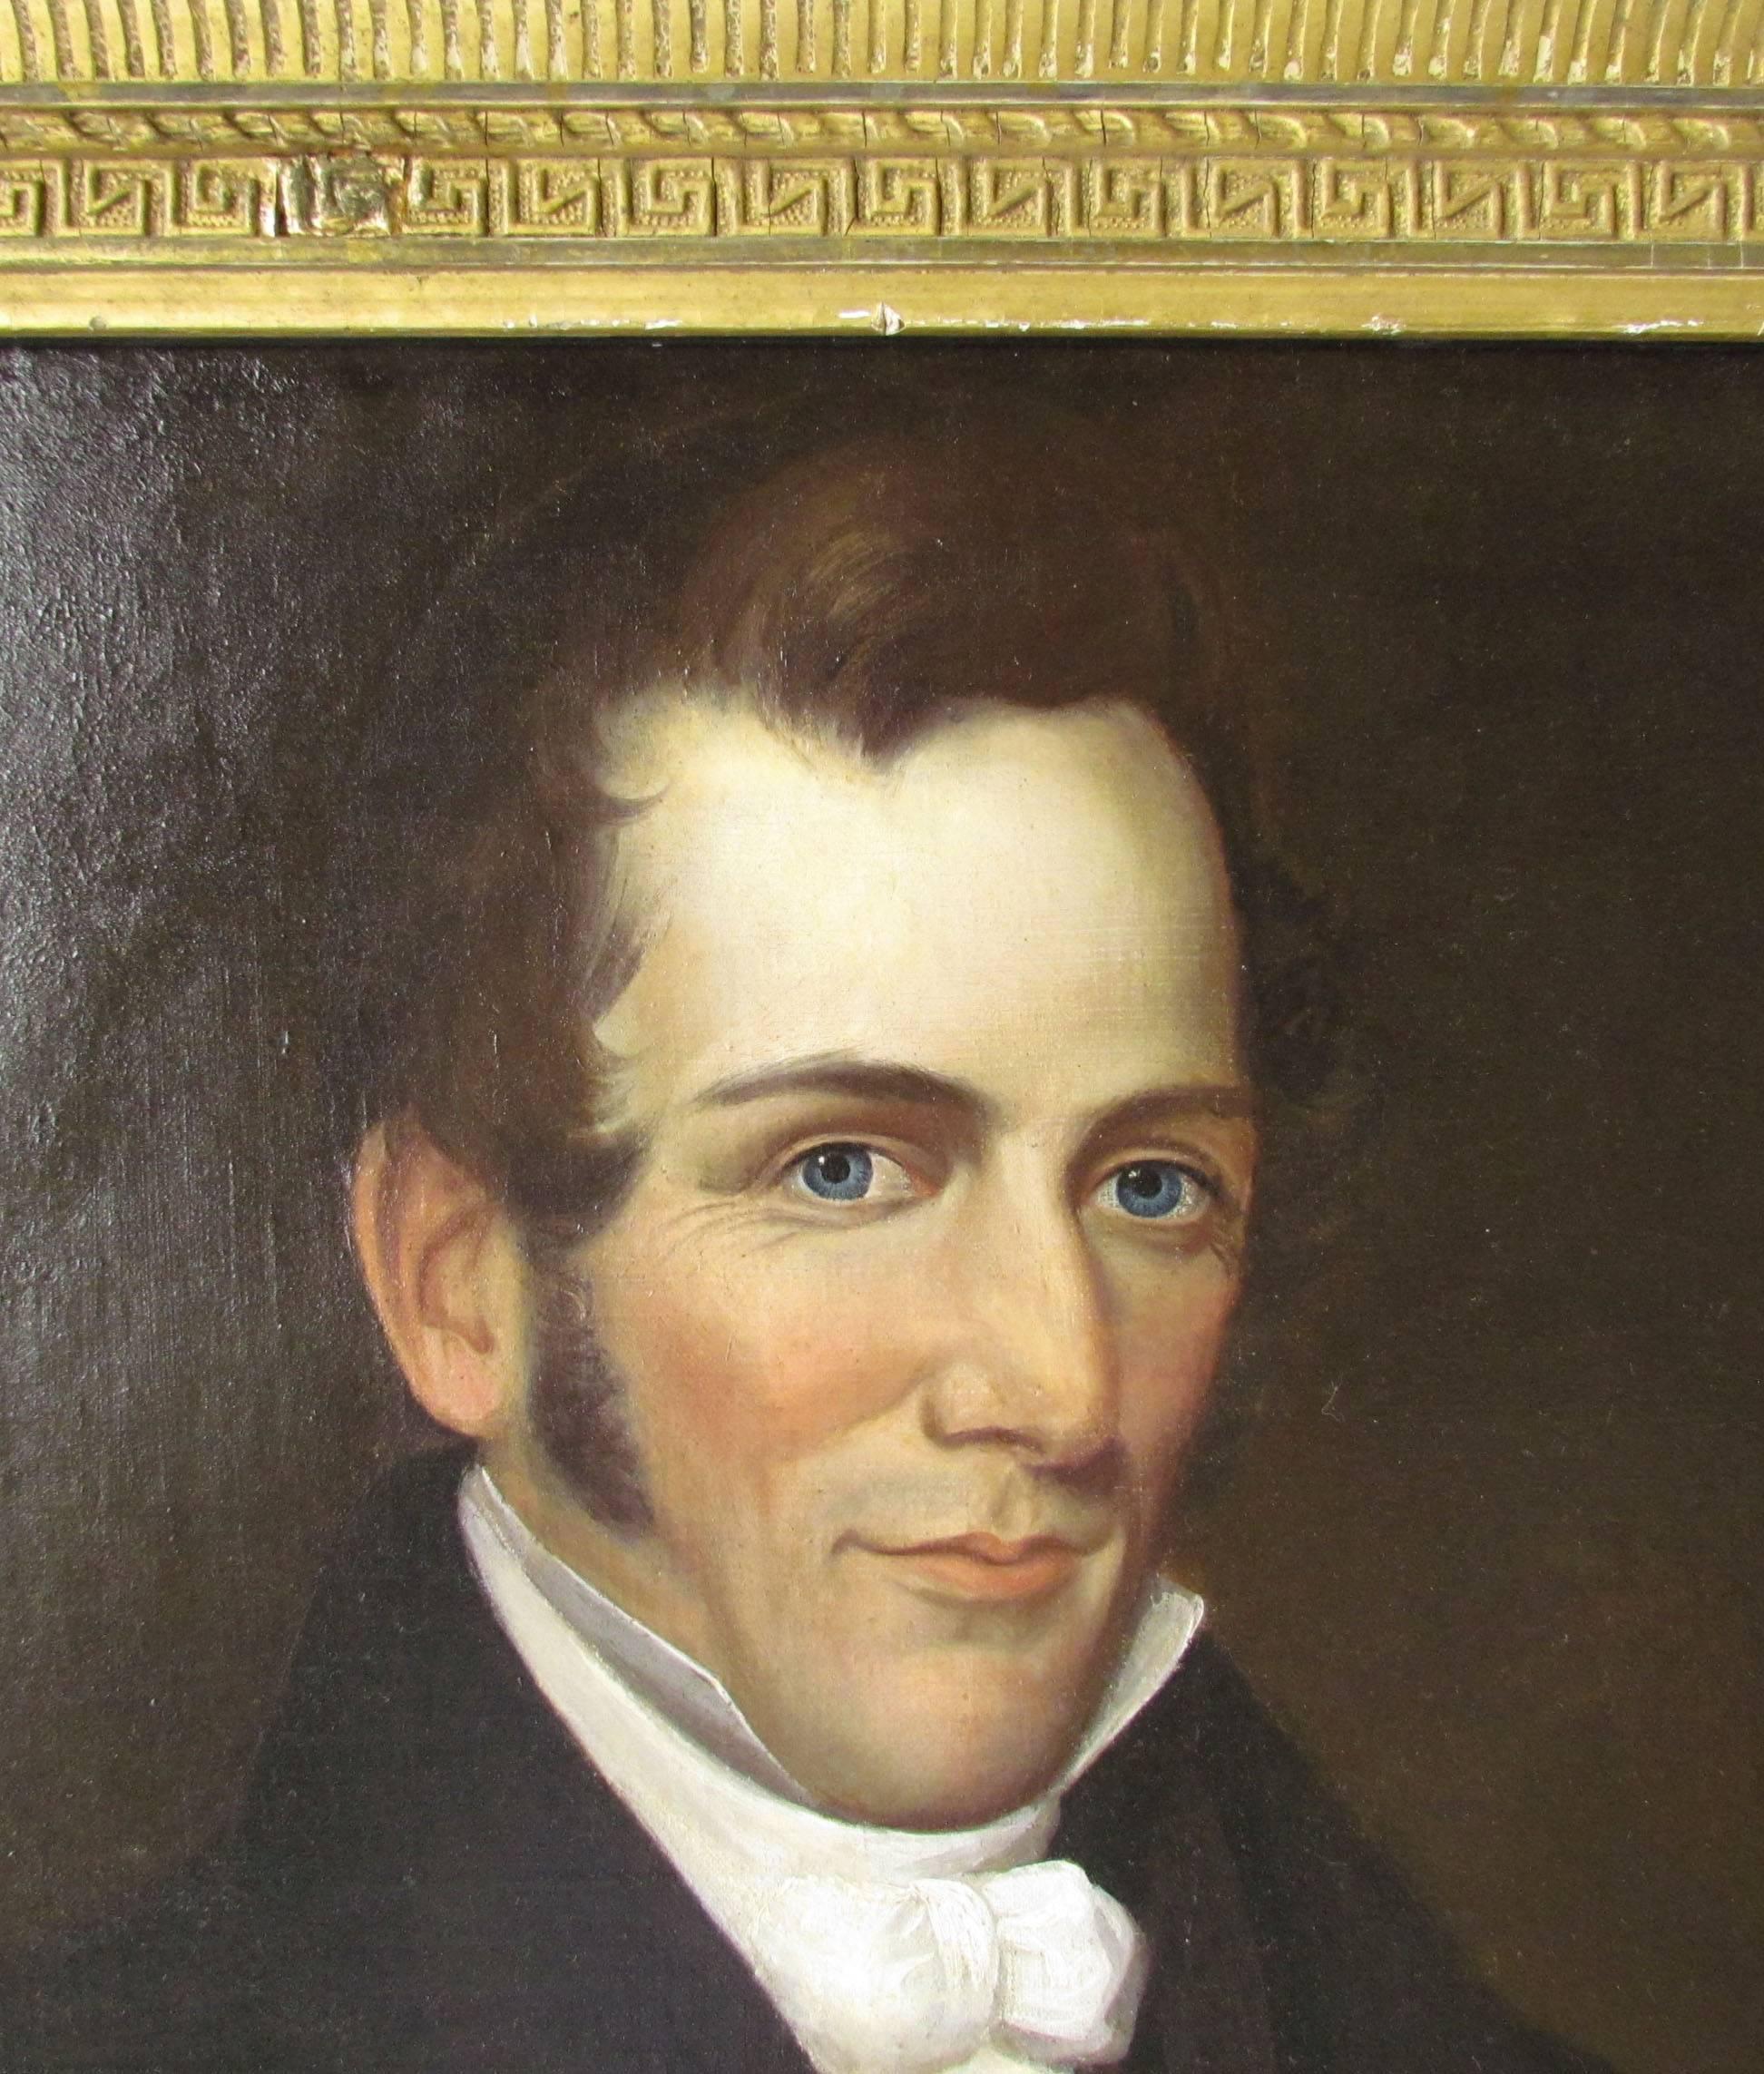 19th century oil portrait of U.S. President John Tyler as a young congressman. Tyler served as a Congressman from 1816 to 1821 (and also as Virginia's Governor from 1825 to 1827, Senator from 1827 to 1836, and as President from 1841-1845). Although